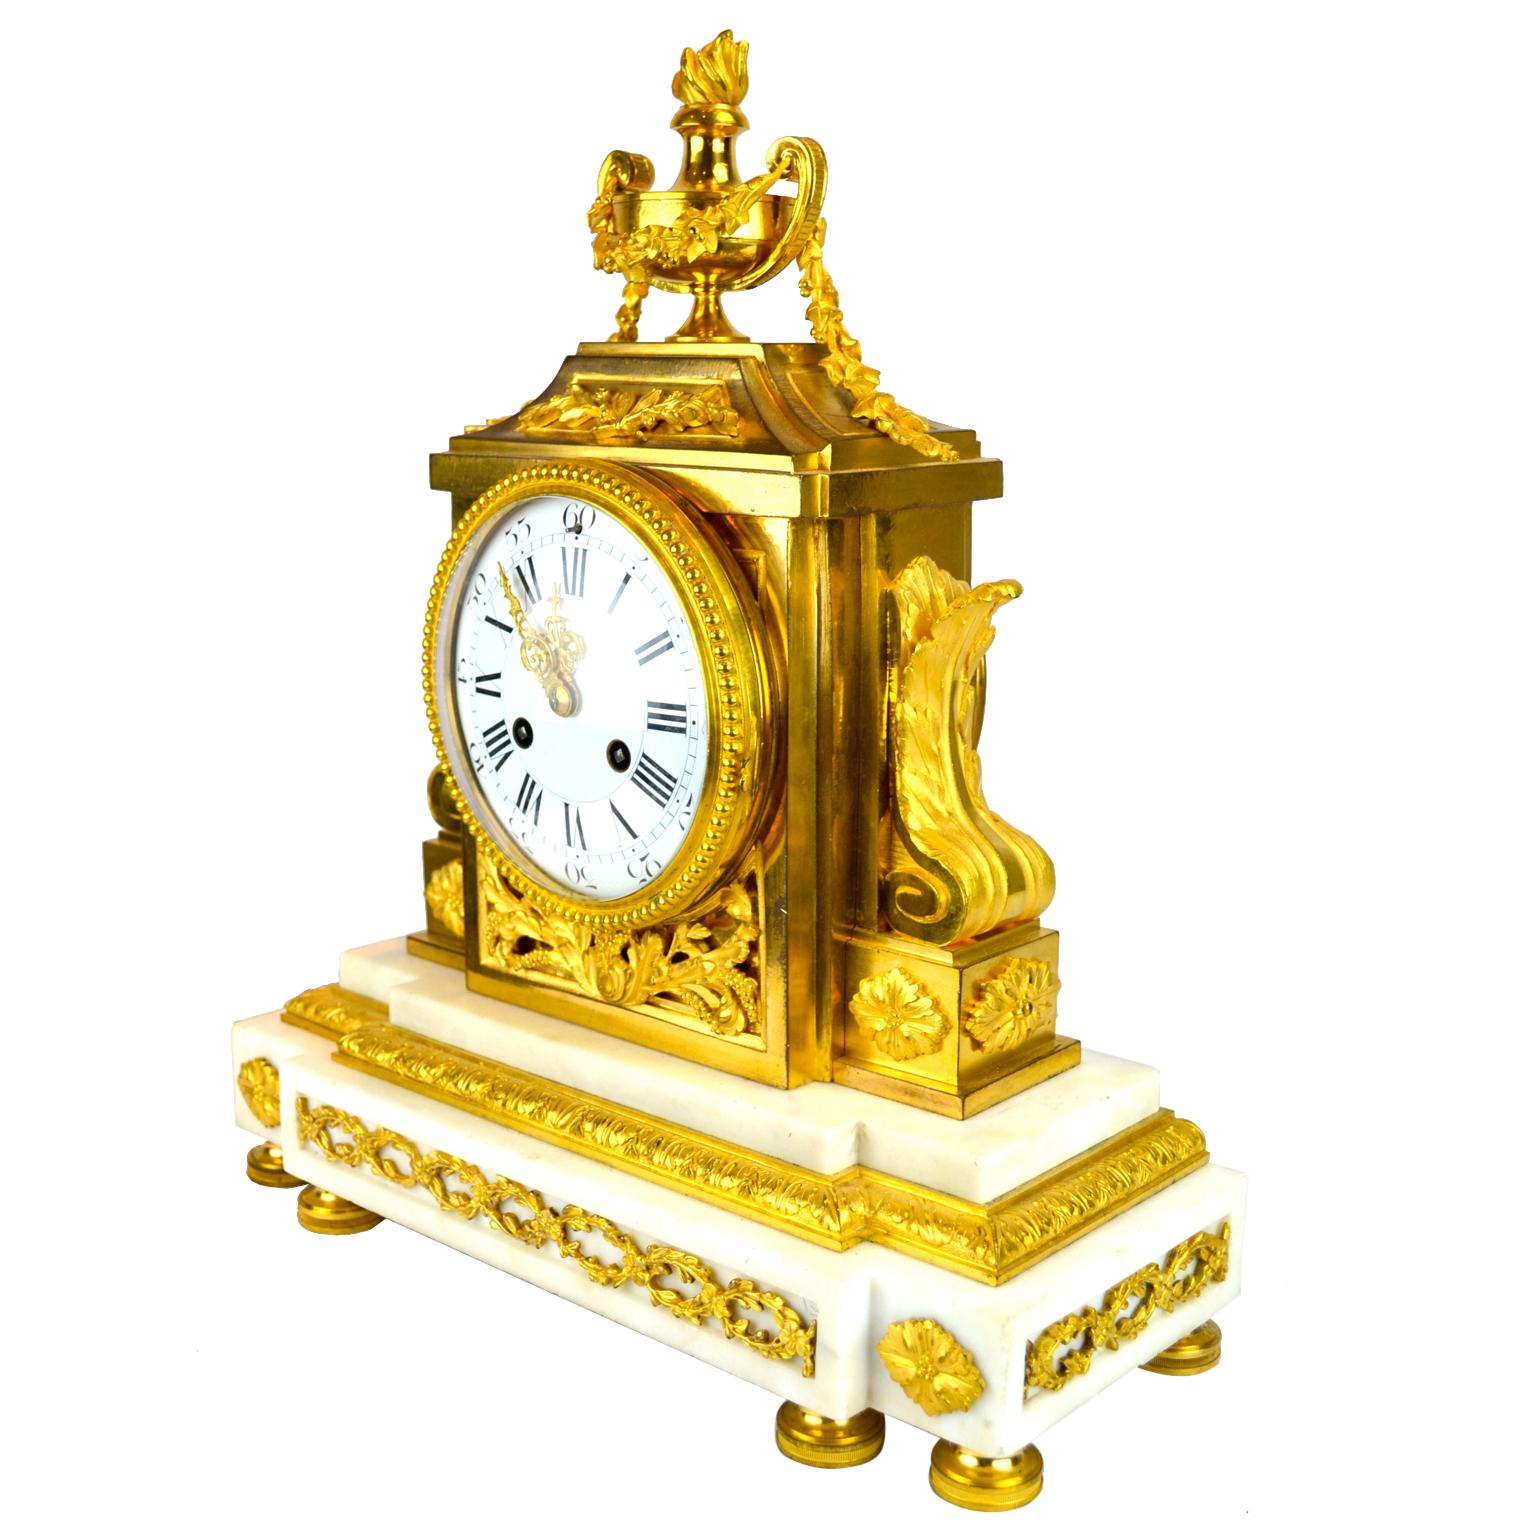 A very finely cast Louis XVI style marble and gilt bronze clock of architectural form. The rectangular stepped white marble bases sitting on six toupie feet, the lower front frieze decorated with paterae and entwined gilded floral vines. The white